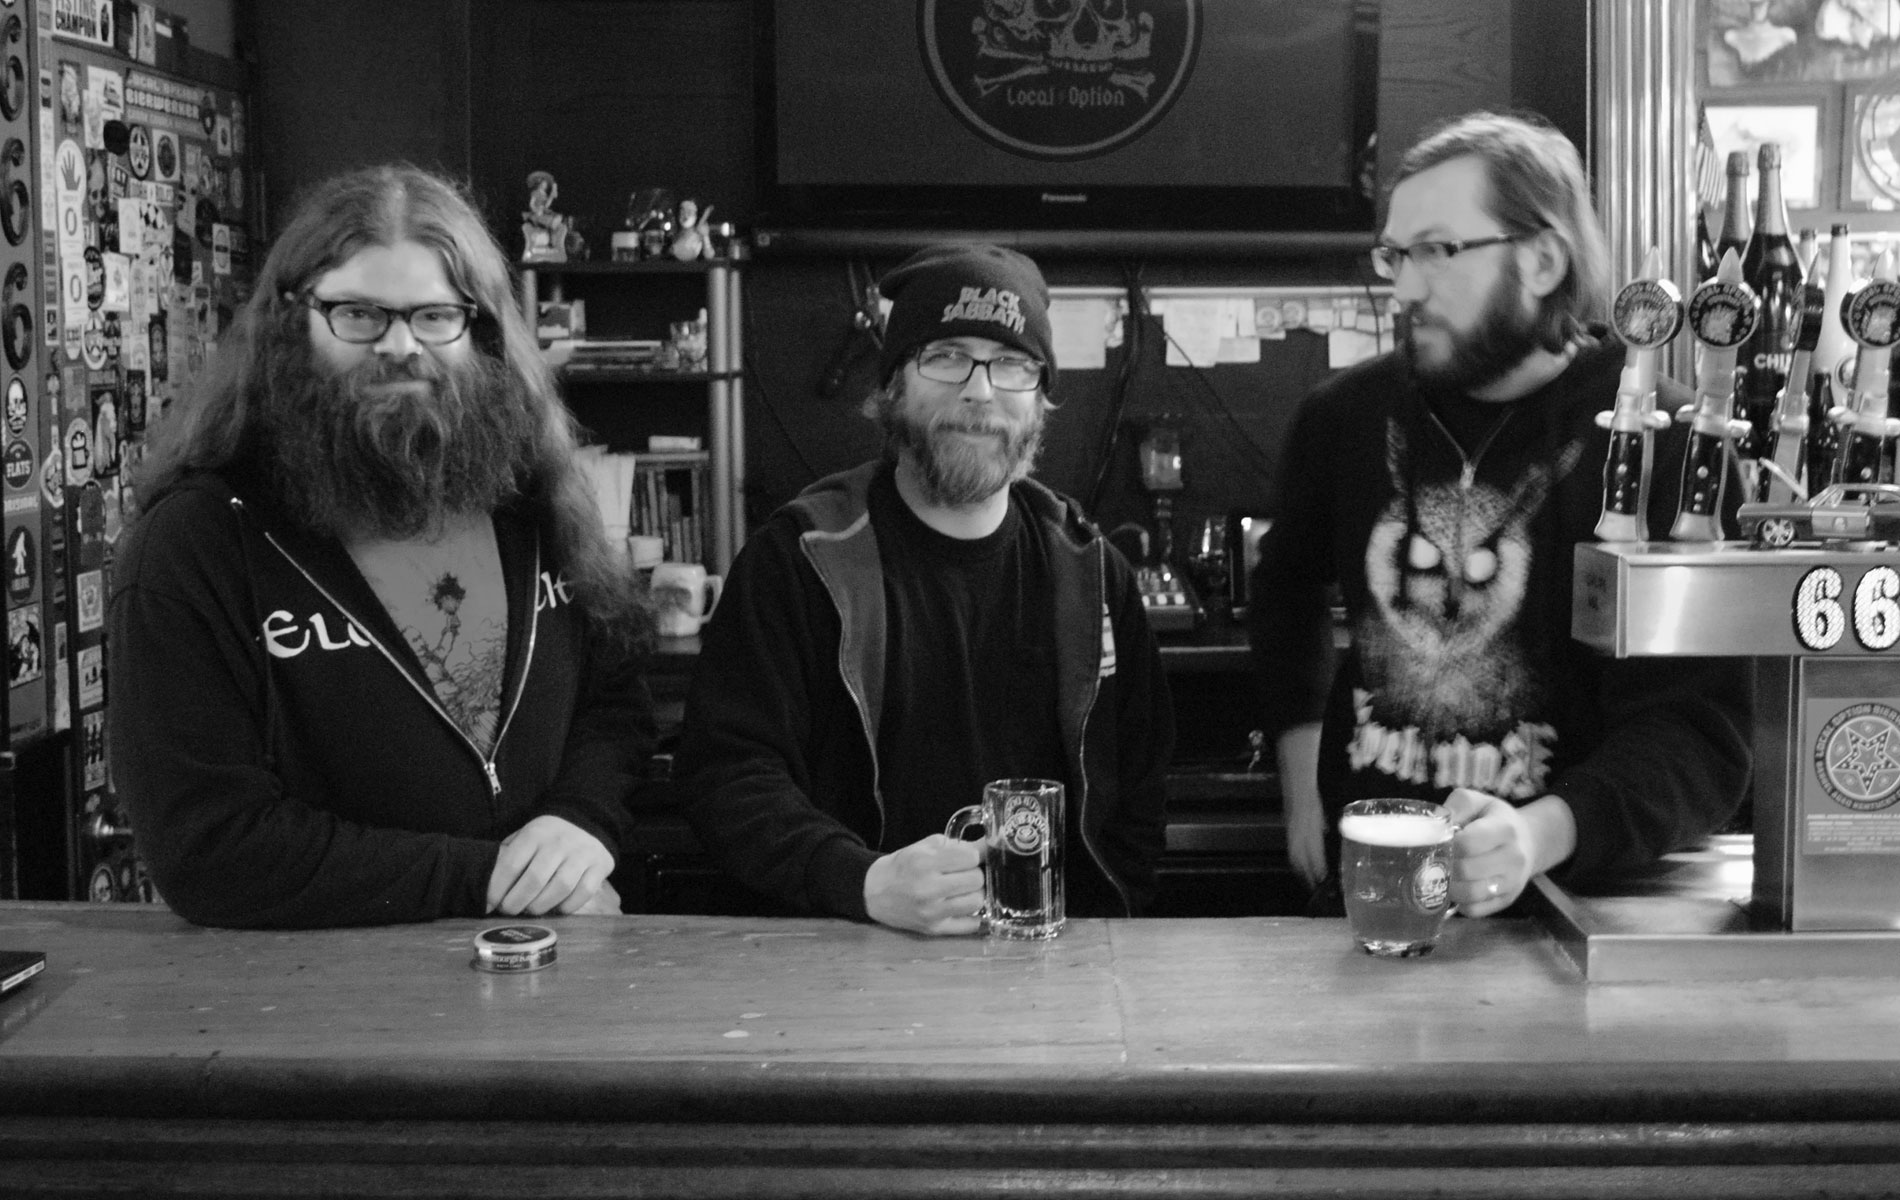 Brewer Chat: Beer & Metal with Local Option